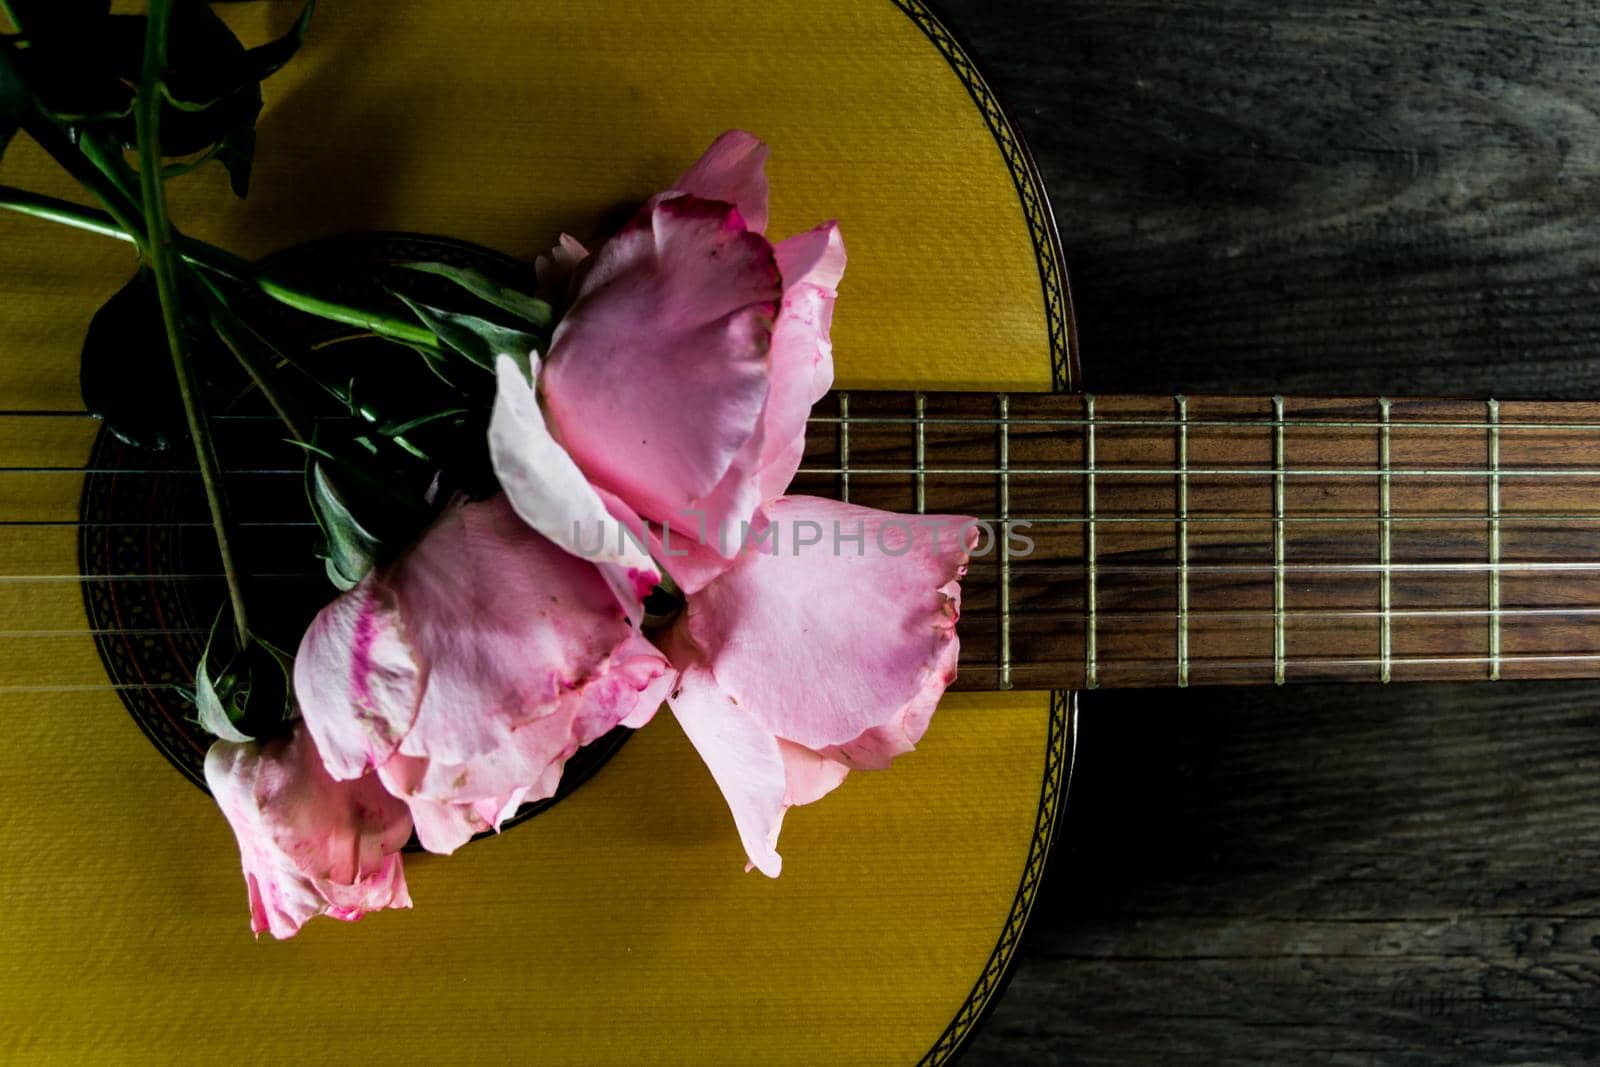 a bouquet of pink roses on the guitar strings by GabrielaBertolini